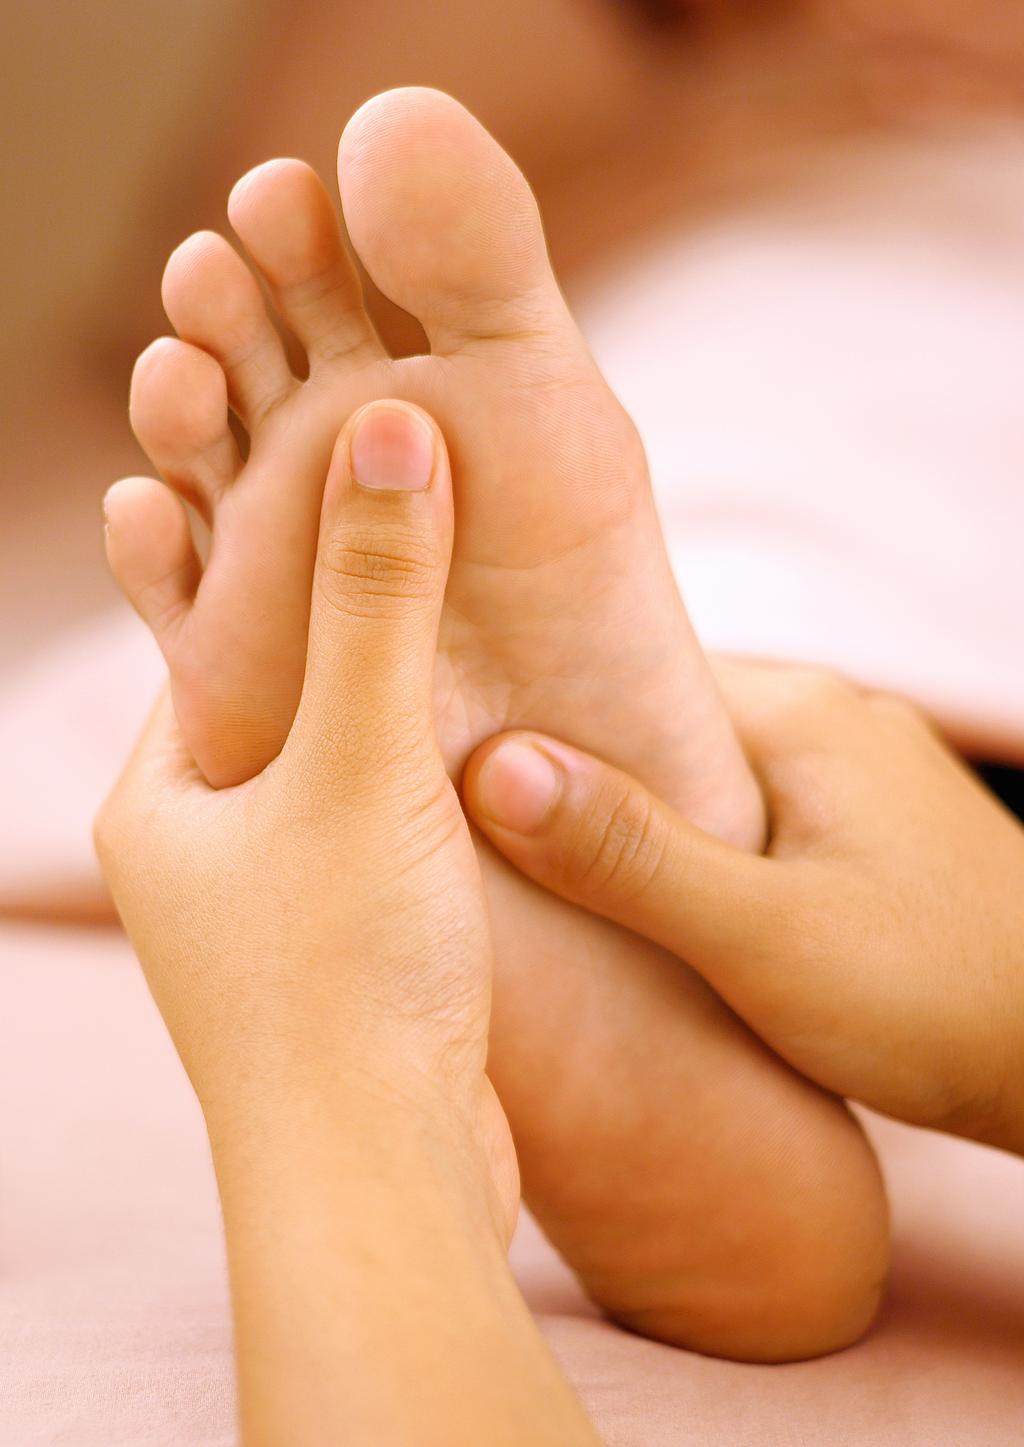 Issue #: [Date] REFLEXOLOGY: MORE THAN JUST A FOOT MASSAGE I am often asked, What is reflexology? My quick answer is that Reflexology is a foot massage.